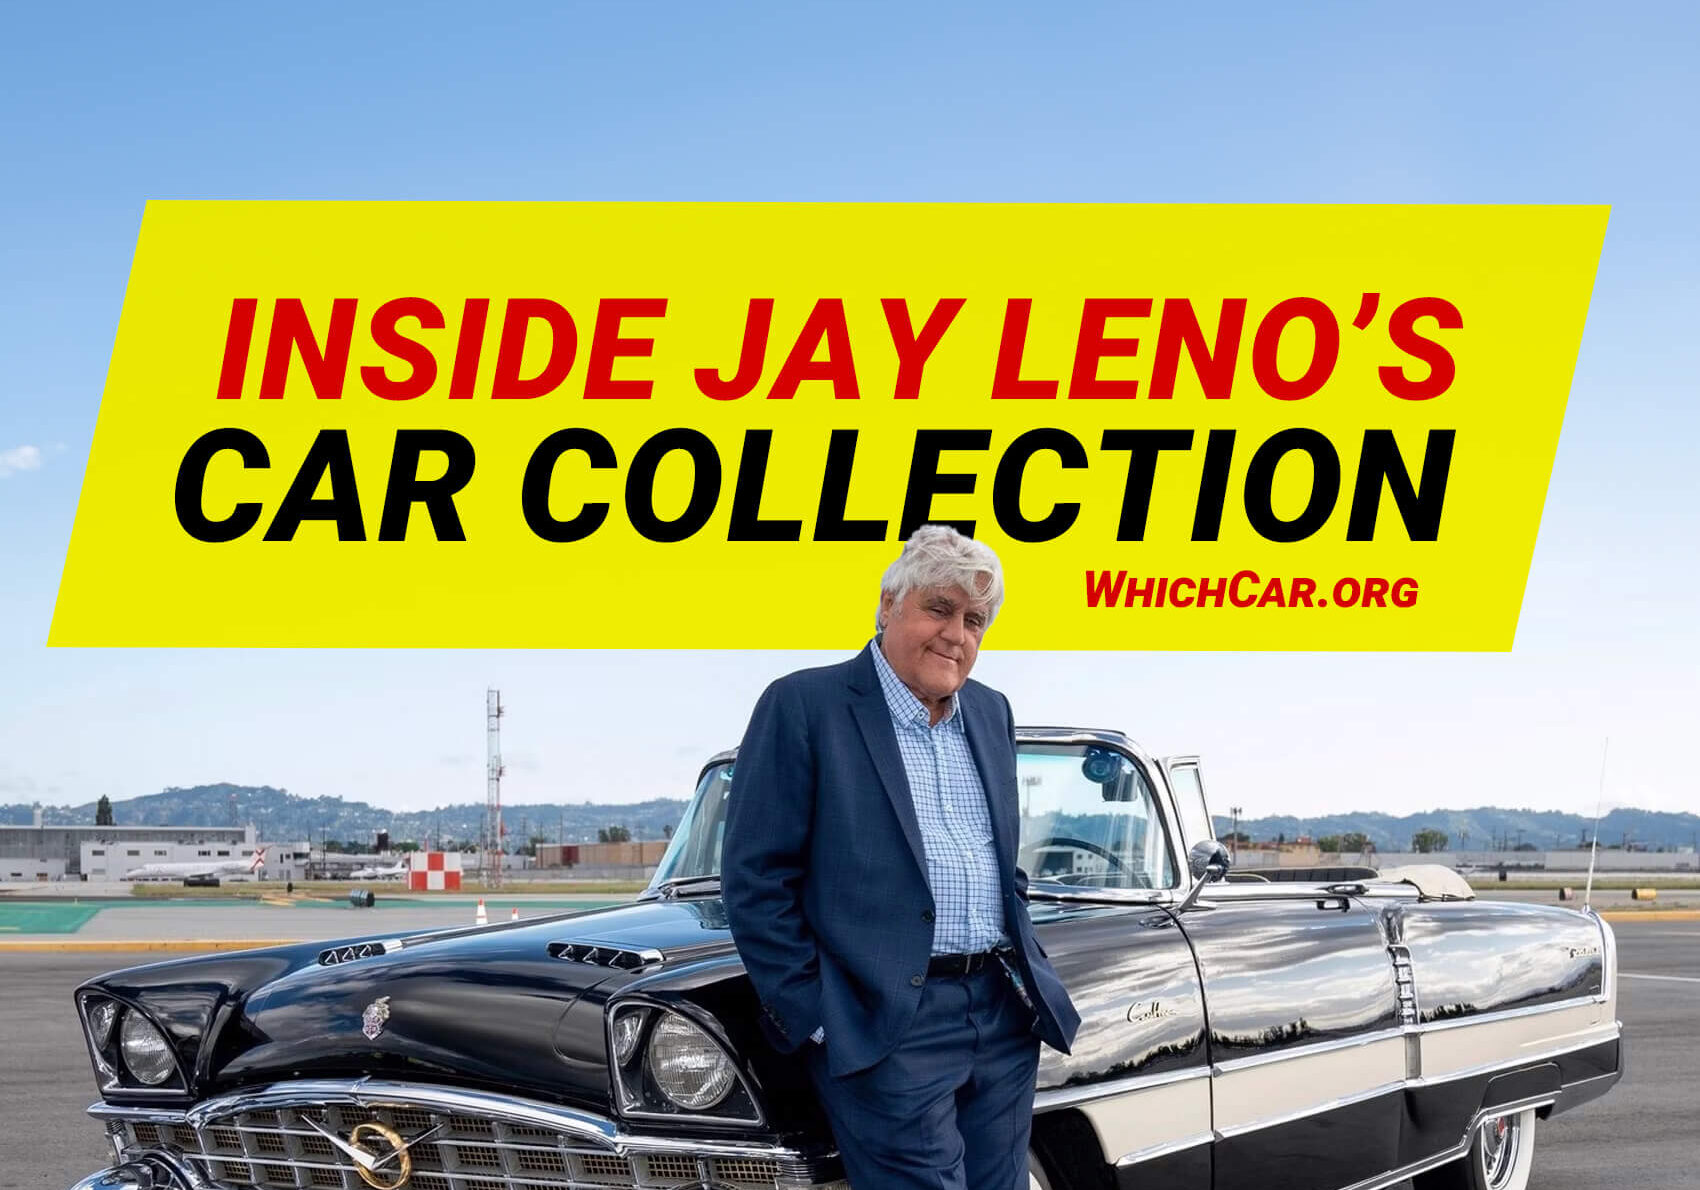 Jay leno posing in front of car collection